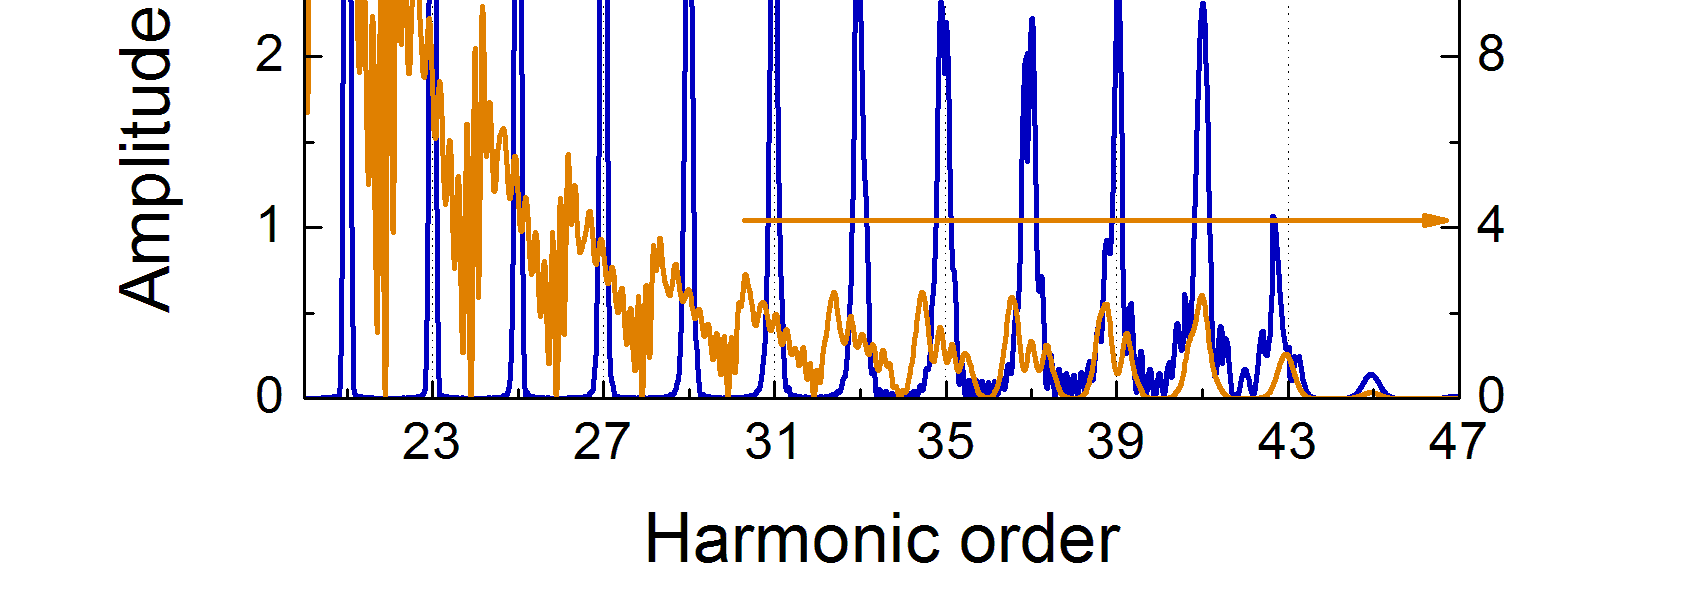 4 FIG. 3: Attosecond pulses generated through short and long trajectory components. FIG. 4: Attosecond pulse train sections. thus the harmonic lines are supposed to cover a broader range.